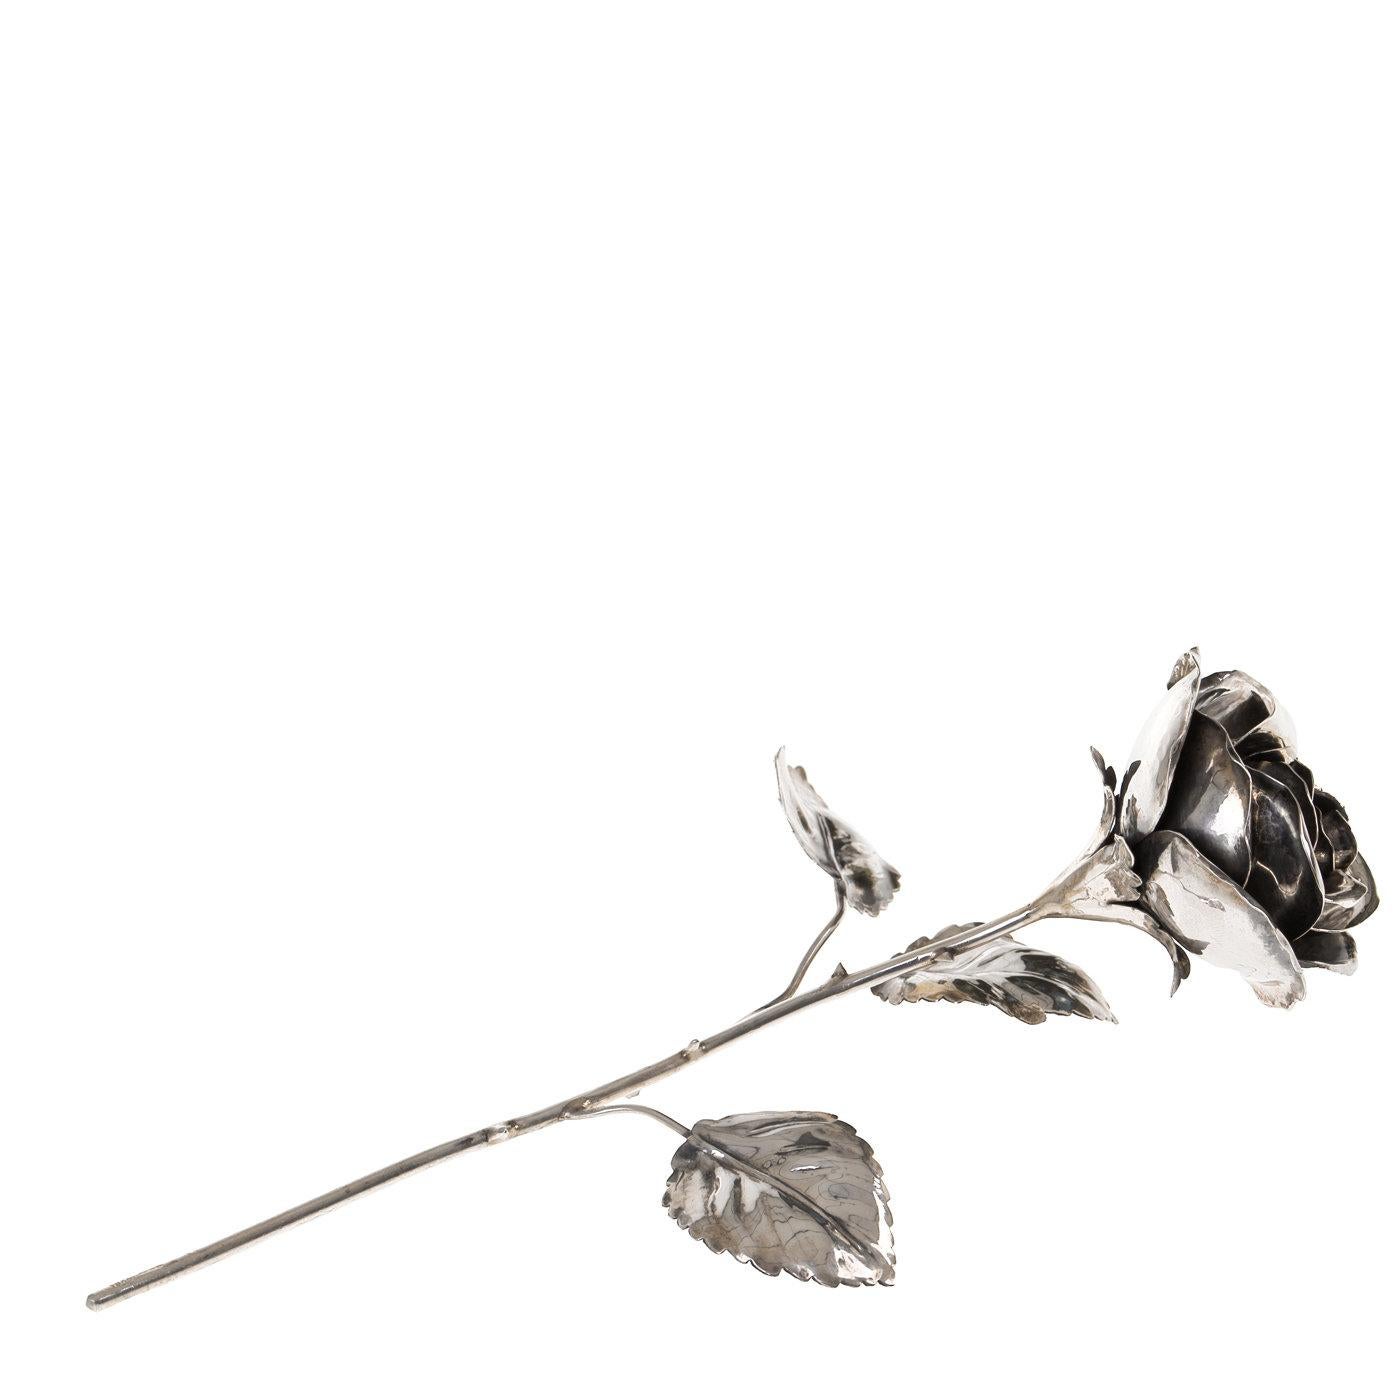 At once symbolic and ornamental, the deft workmanship of the Florentine silversmith workshop Lisi Brothers achieves a life-likeness in this elegant sterling silver rose. The flower is embossed and engraved by hand in order to achieve the highest